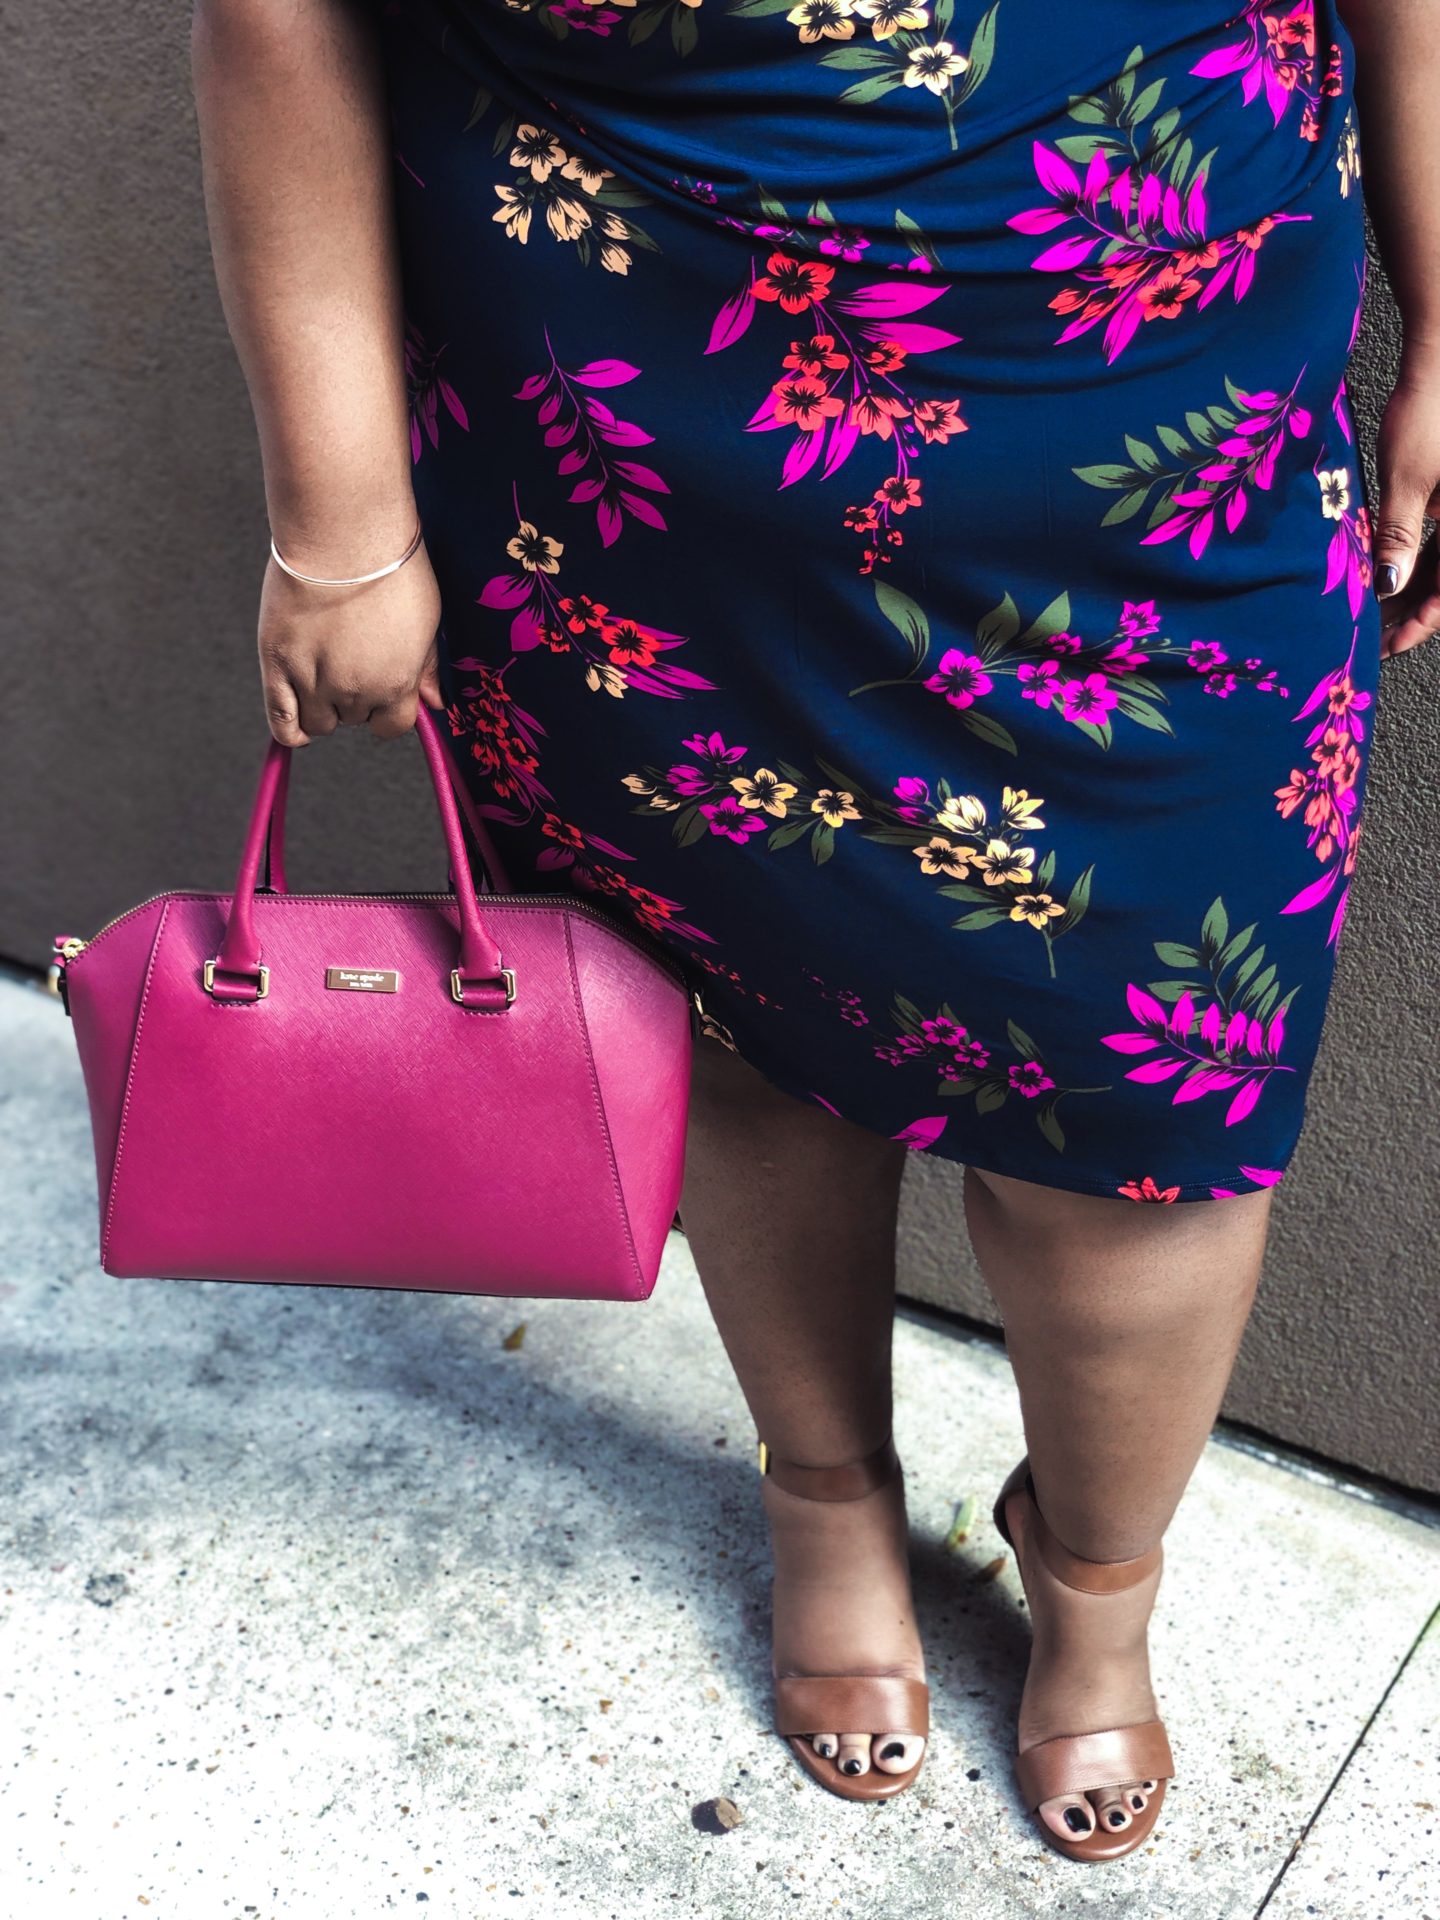 Plus Size Work Outfits